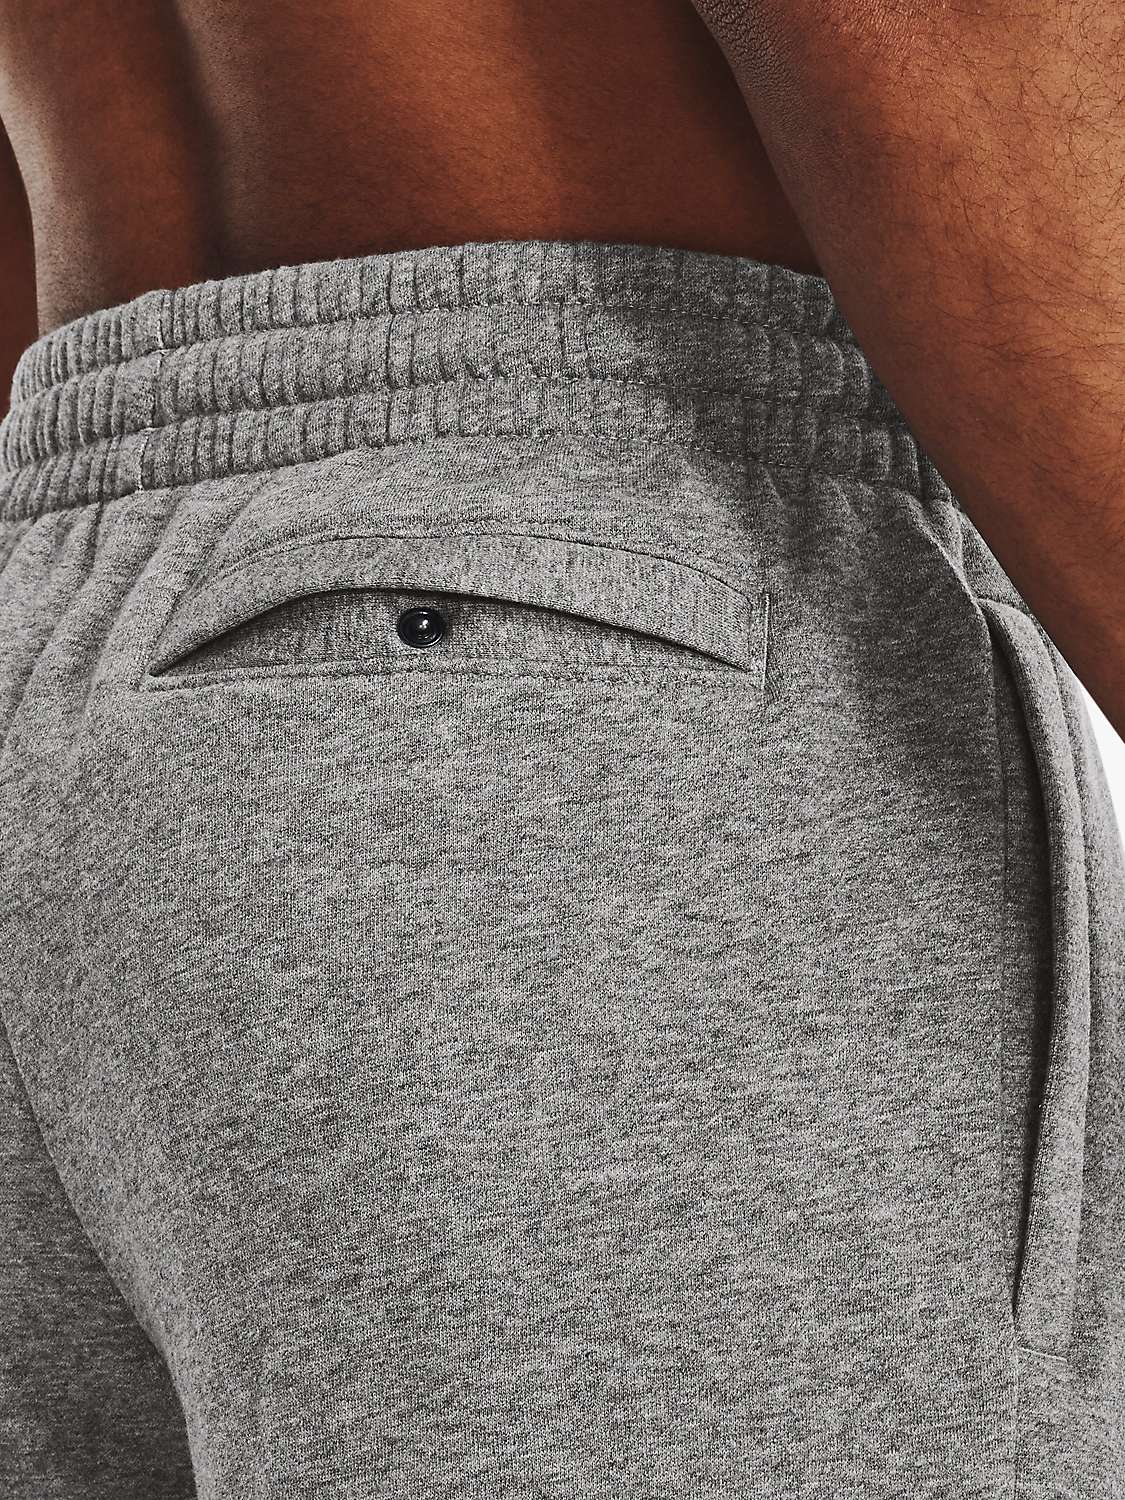 Buy Under Armour Rival Fleece Shorts, Light Heather/White Online at johnlewis.com